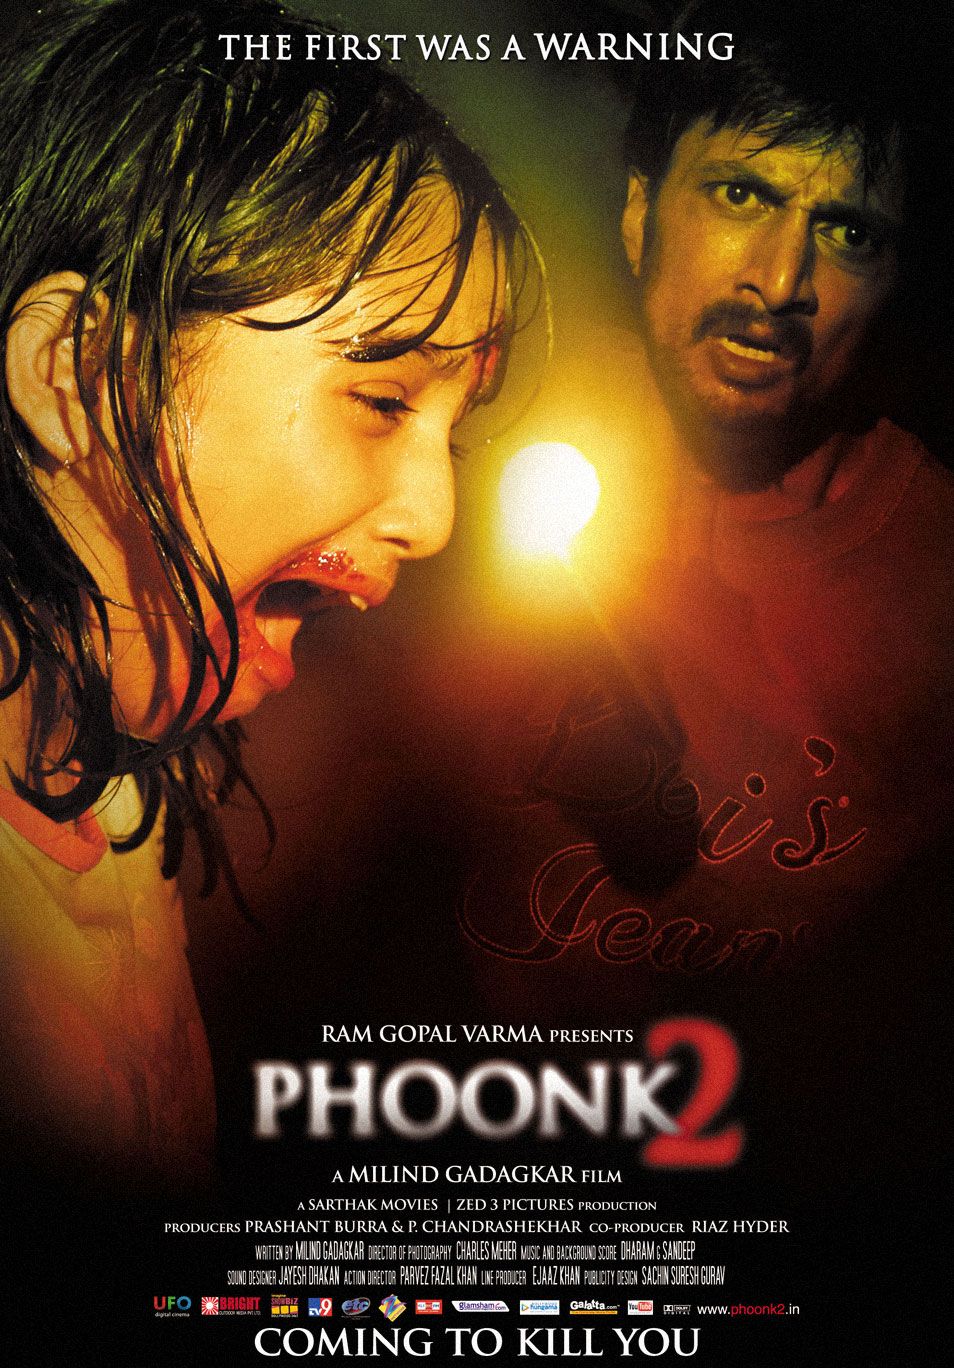 Phoonk 2 Movie: Review | Release Date | Songs | Music | Images